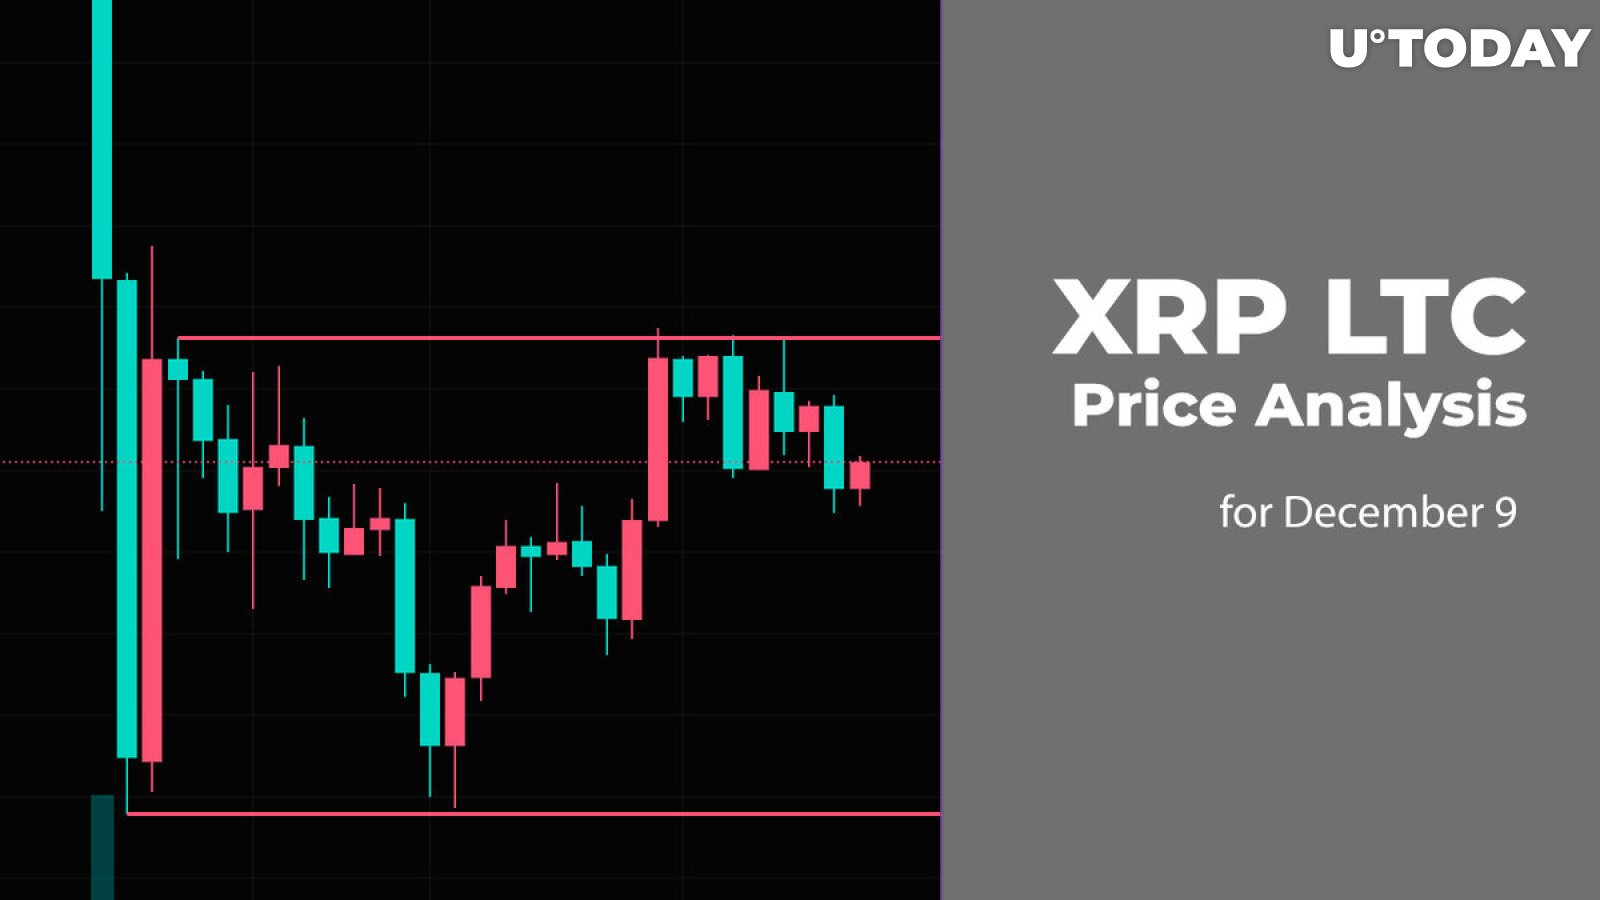 XRP and LTC Price Analysis for December 9